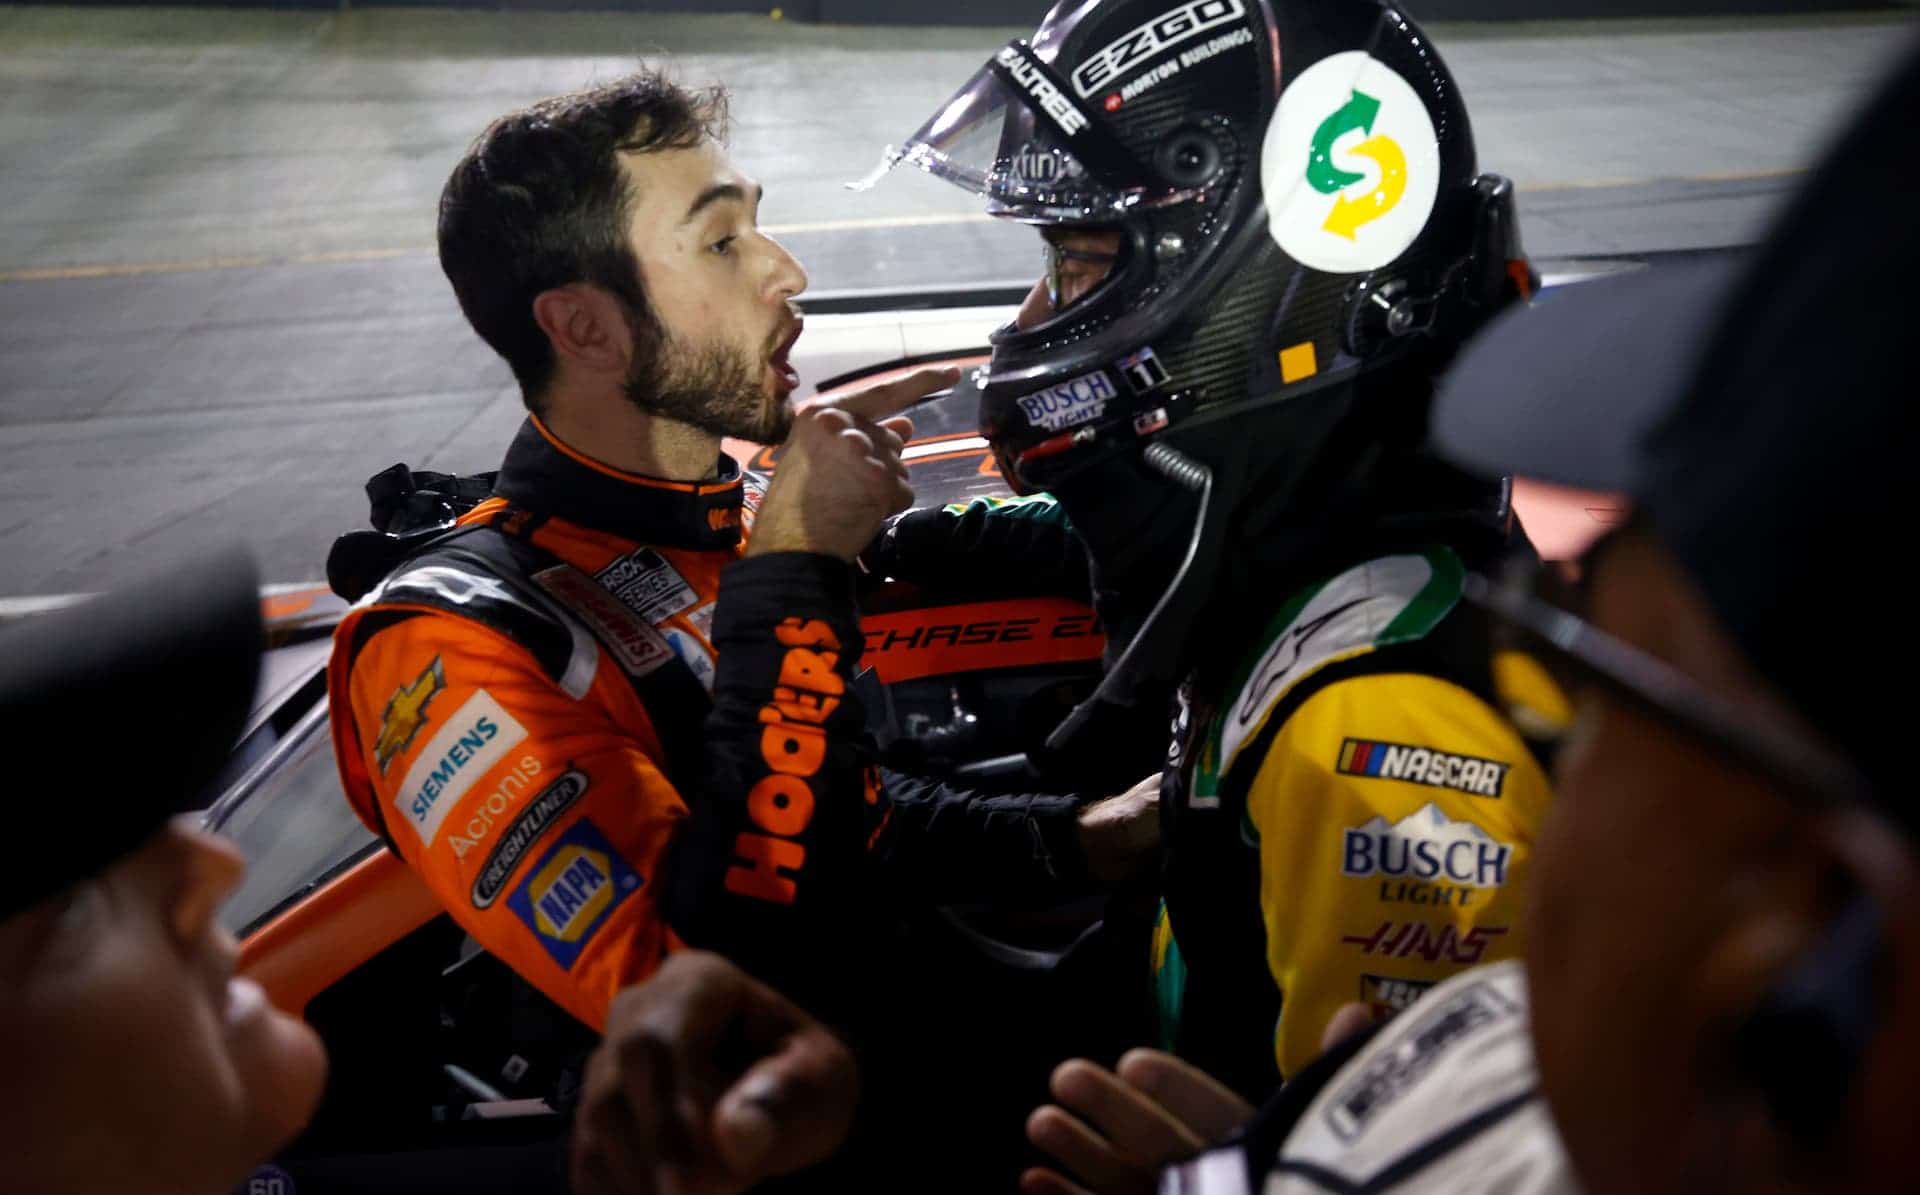 Credit: BRISTOL, TENNESSEE - SEPTEMBER 18: Chase Elliott, driver of the #9 Hooters Chevrolet,(L) and Kevin Harvick, driver of the #4 Subway Delivery Ford, have a heated conversation after an incident late in the NASCAR Cup Series Bass Pro Shops Night Race at Bristol Motor Speedway on September 18, 2021 in Bristol, Tennessee. (Photo by Jared C. Tilton/Getty Images)